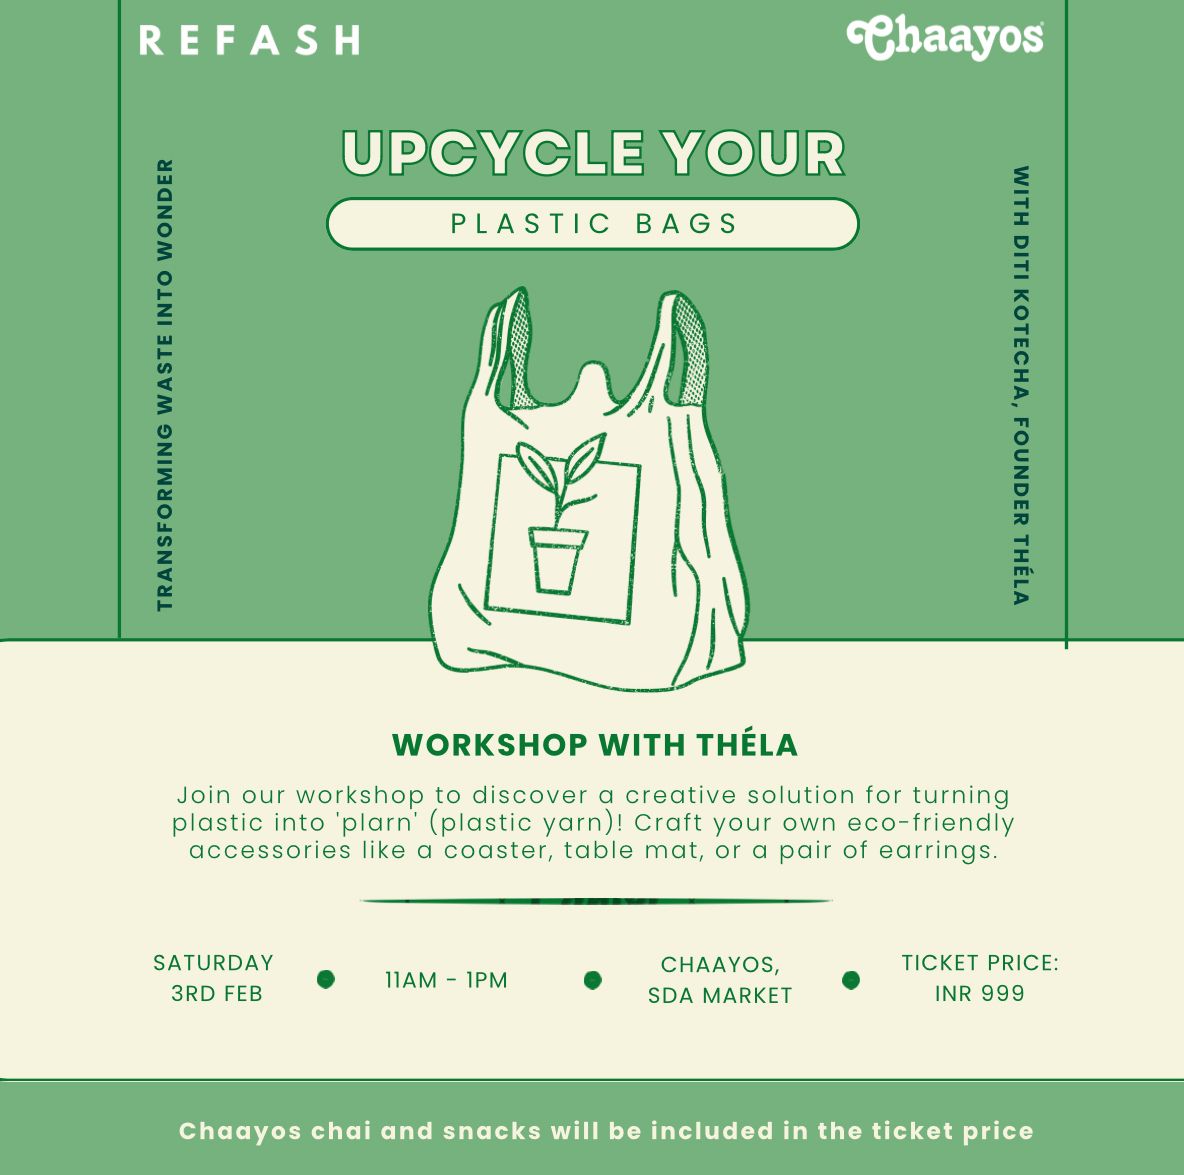 Workshop: Upcycle Your Plastic Bags